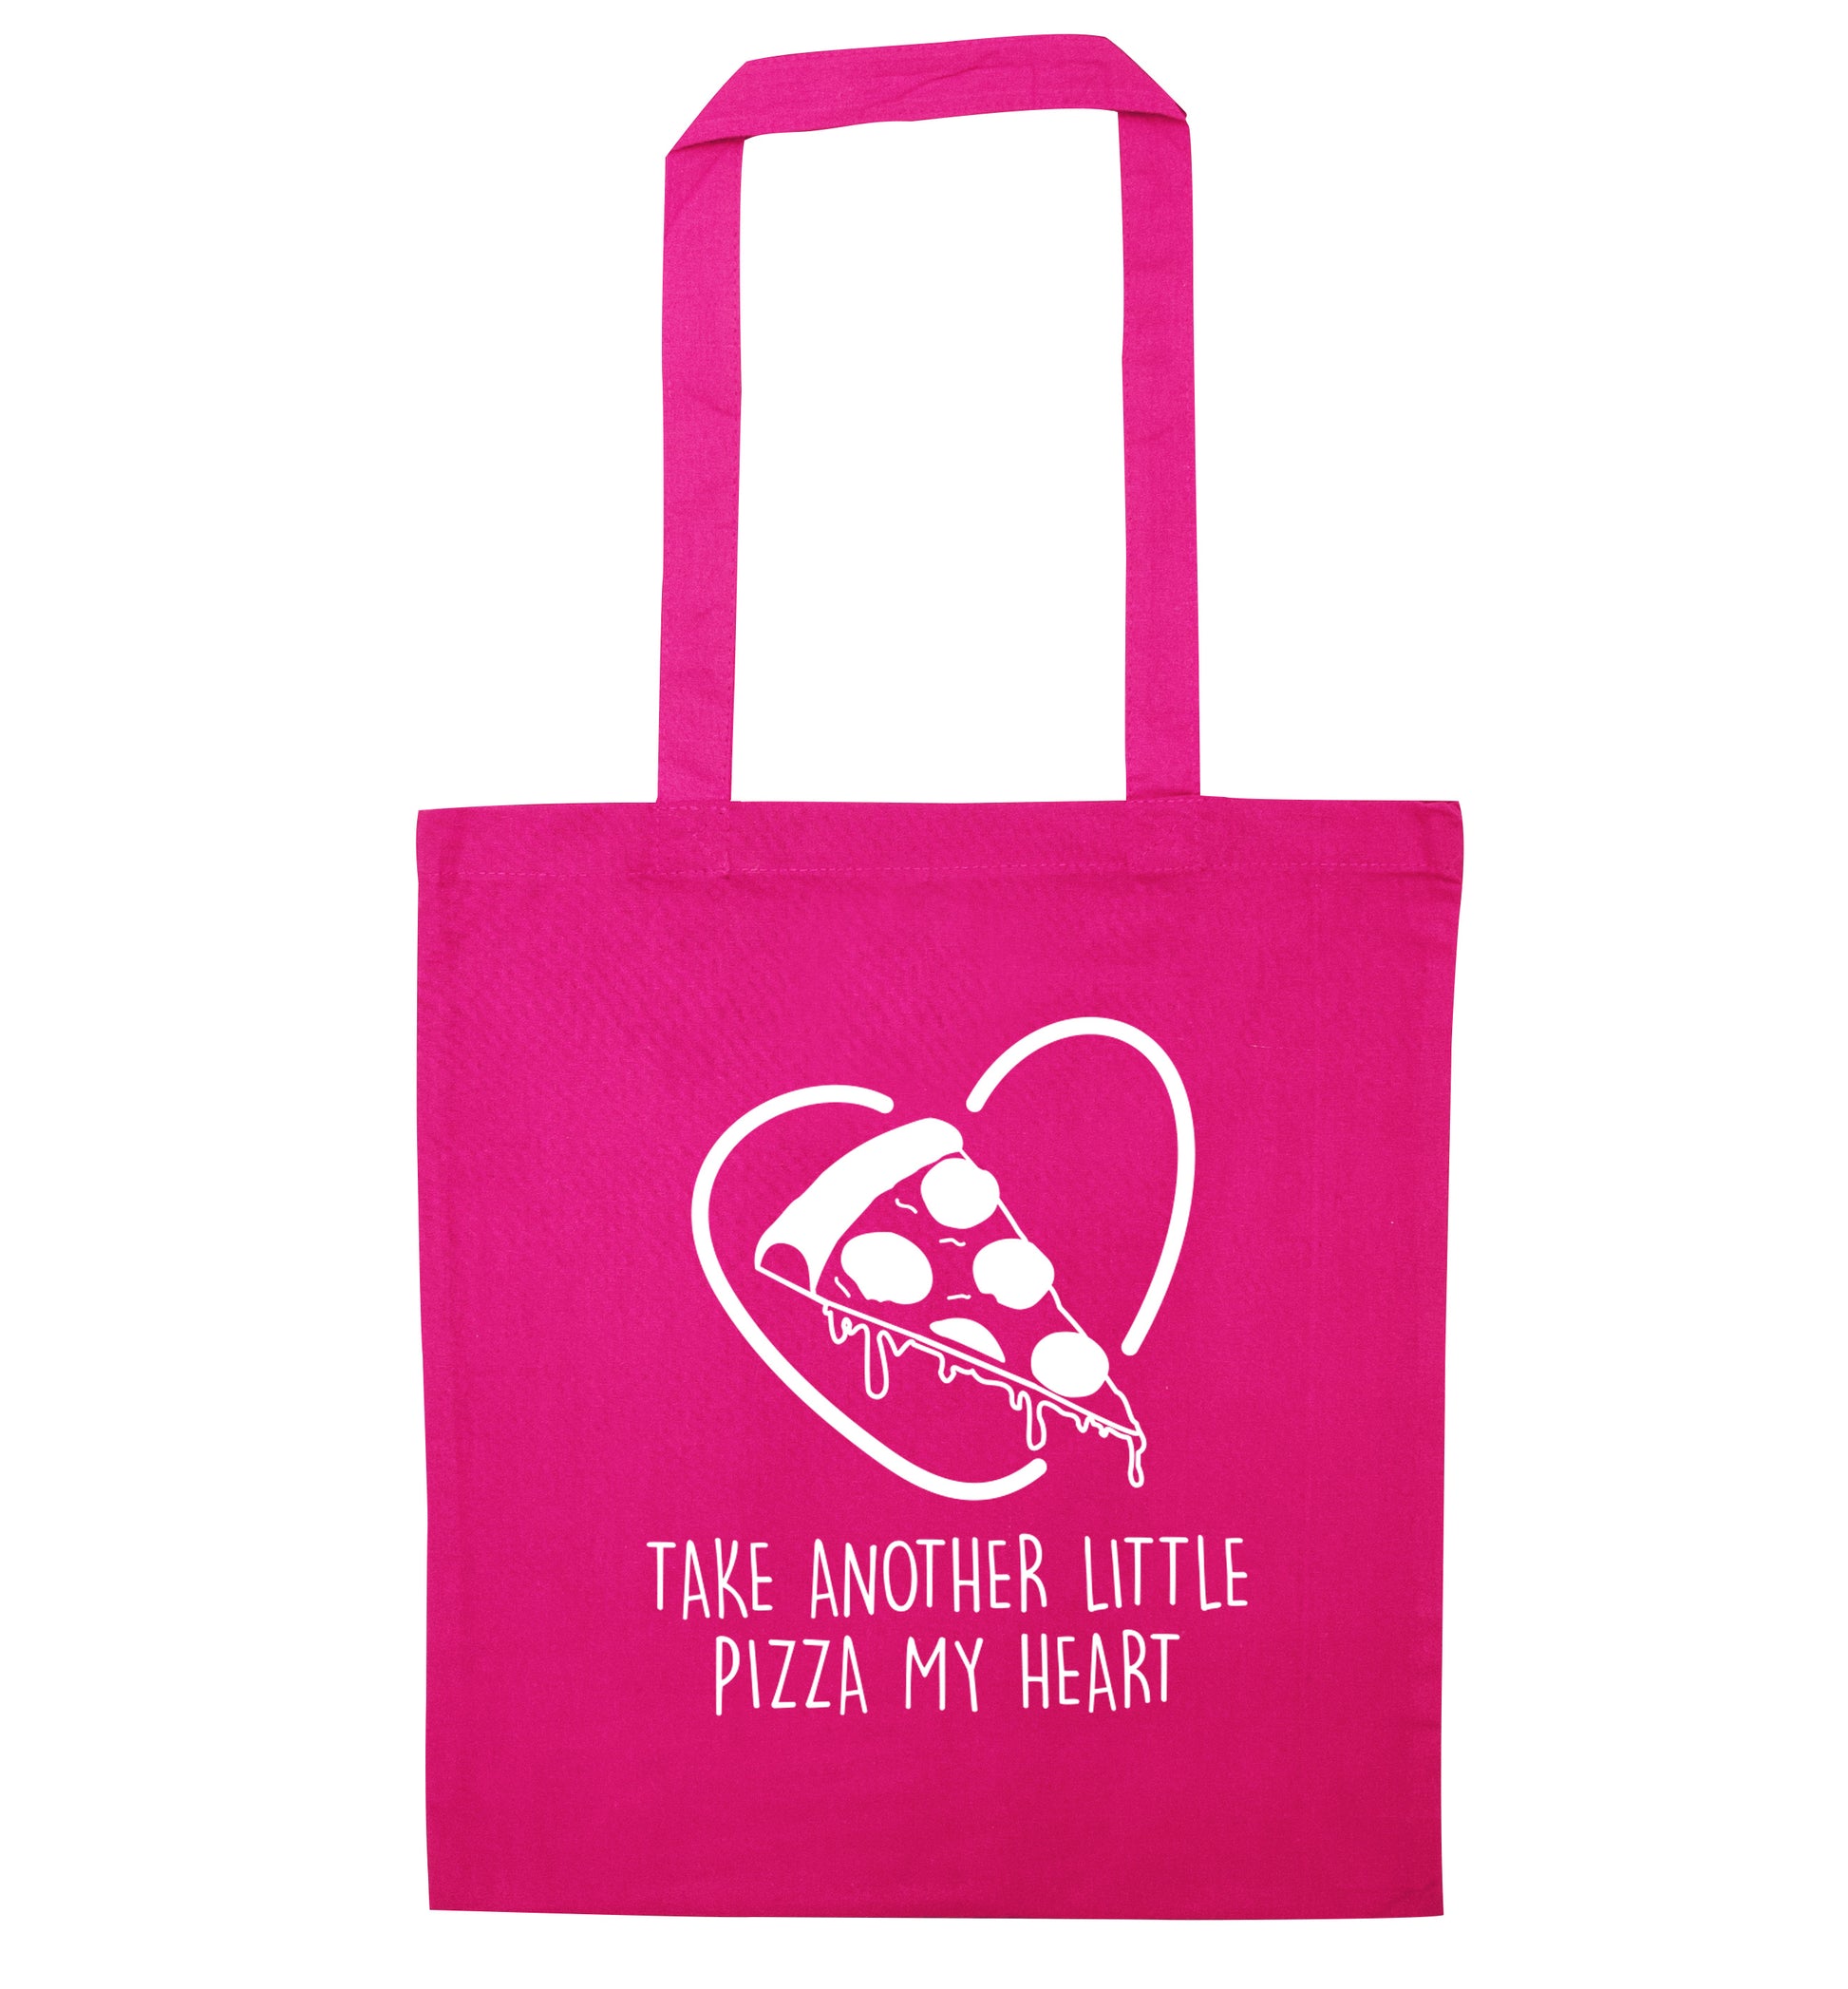 Take another little pizza my heart pink tote bag